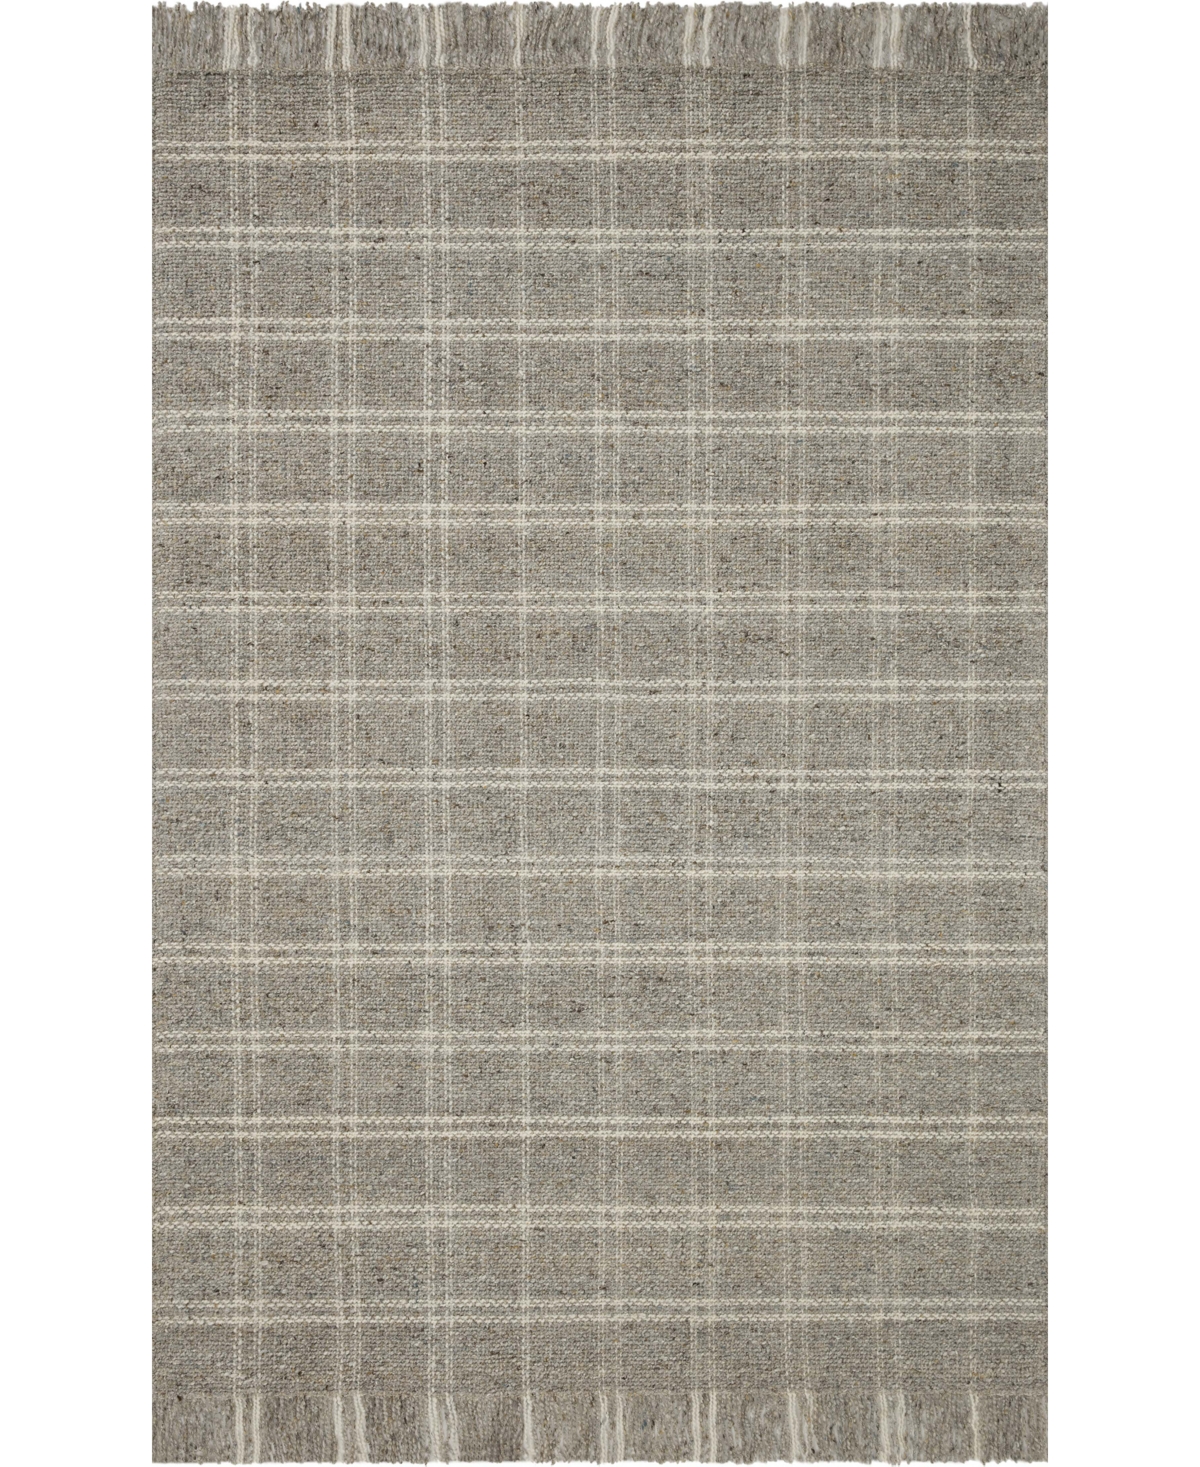 Magnolia Home By Joanna Gaines X Loloi Caleb Cal-04 7'9" X 9'9" Area Rug In Taupe